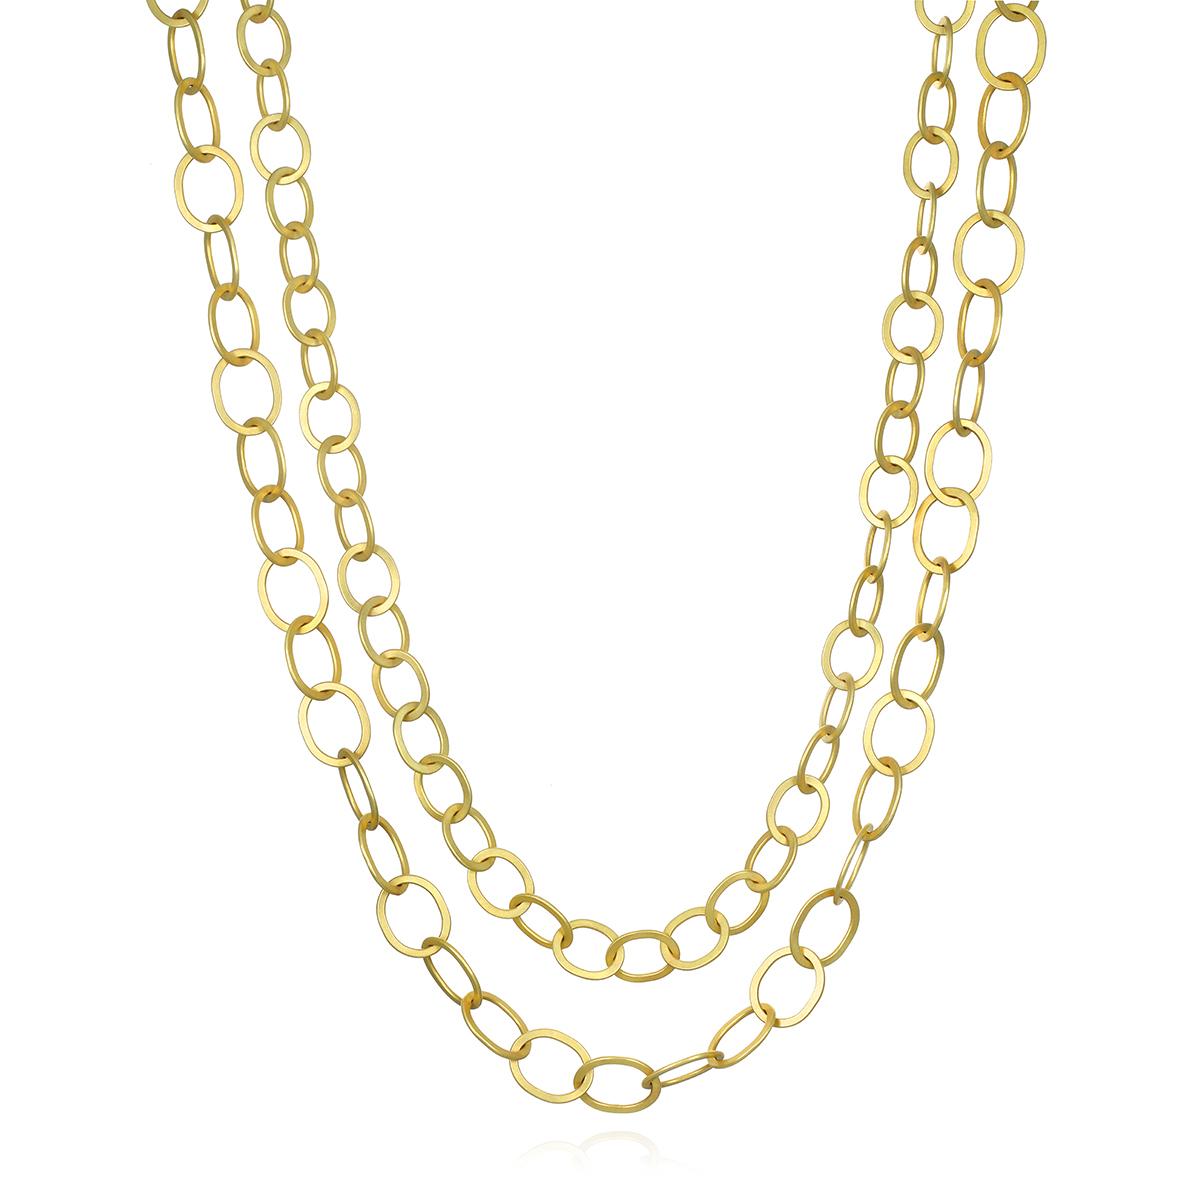 Faye Kim 18 Karat Gold Oval Planished Link Chain  For Sale 1